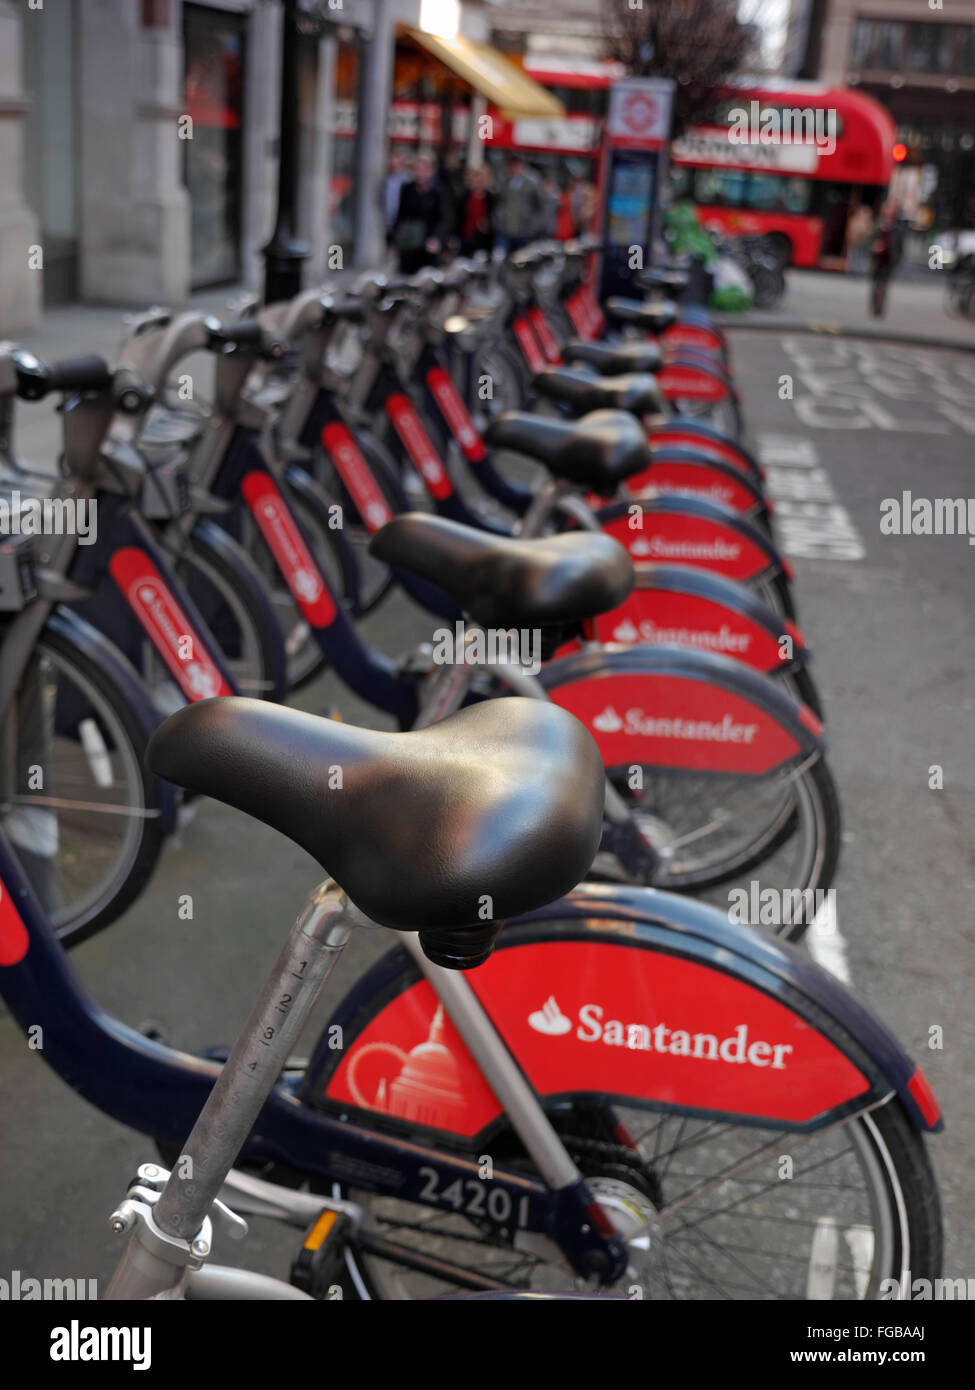 TFL London red Santander rental hire bikes bicycles in Covent Garden with sponsor livery of Santander red London Bus in background  London UK Stock Photo